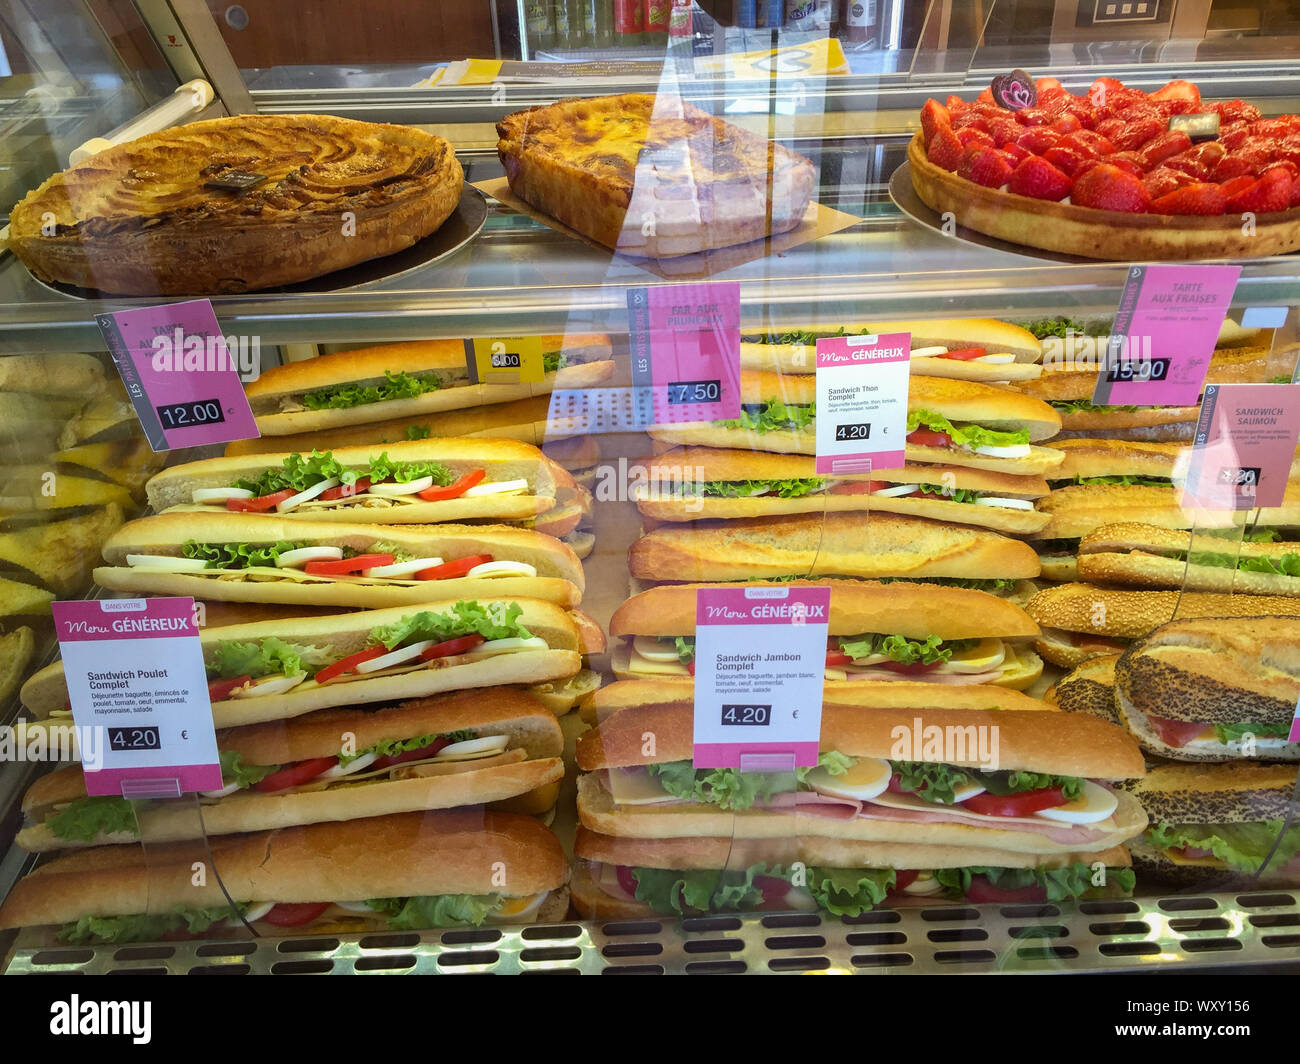 https://c8.alamy.com/comp/WXY156/display-case-of-french-baguette-sandwiches-and-pastries-normandy-france-WXY156.jpg